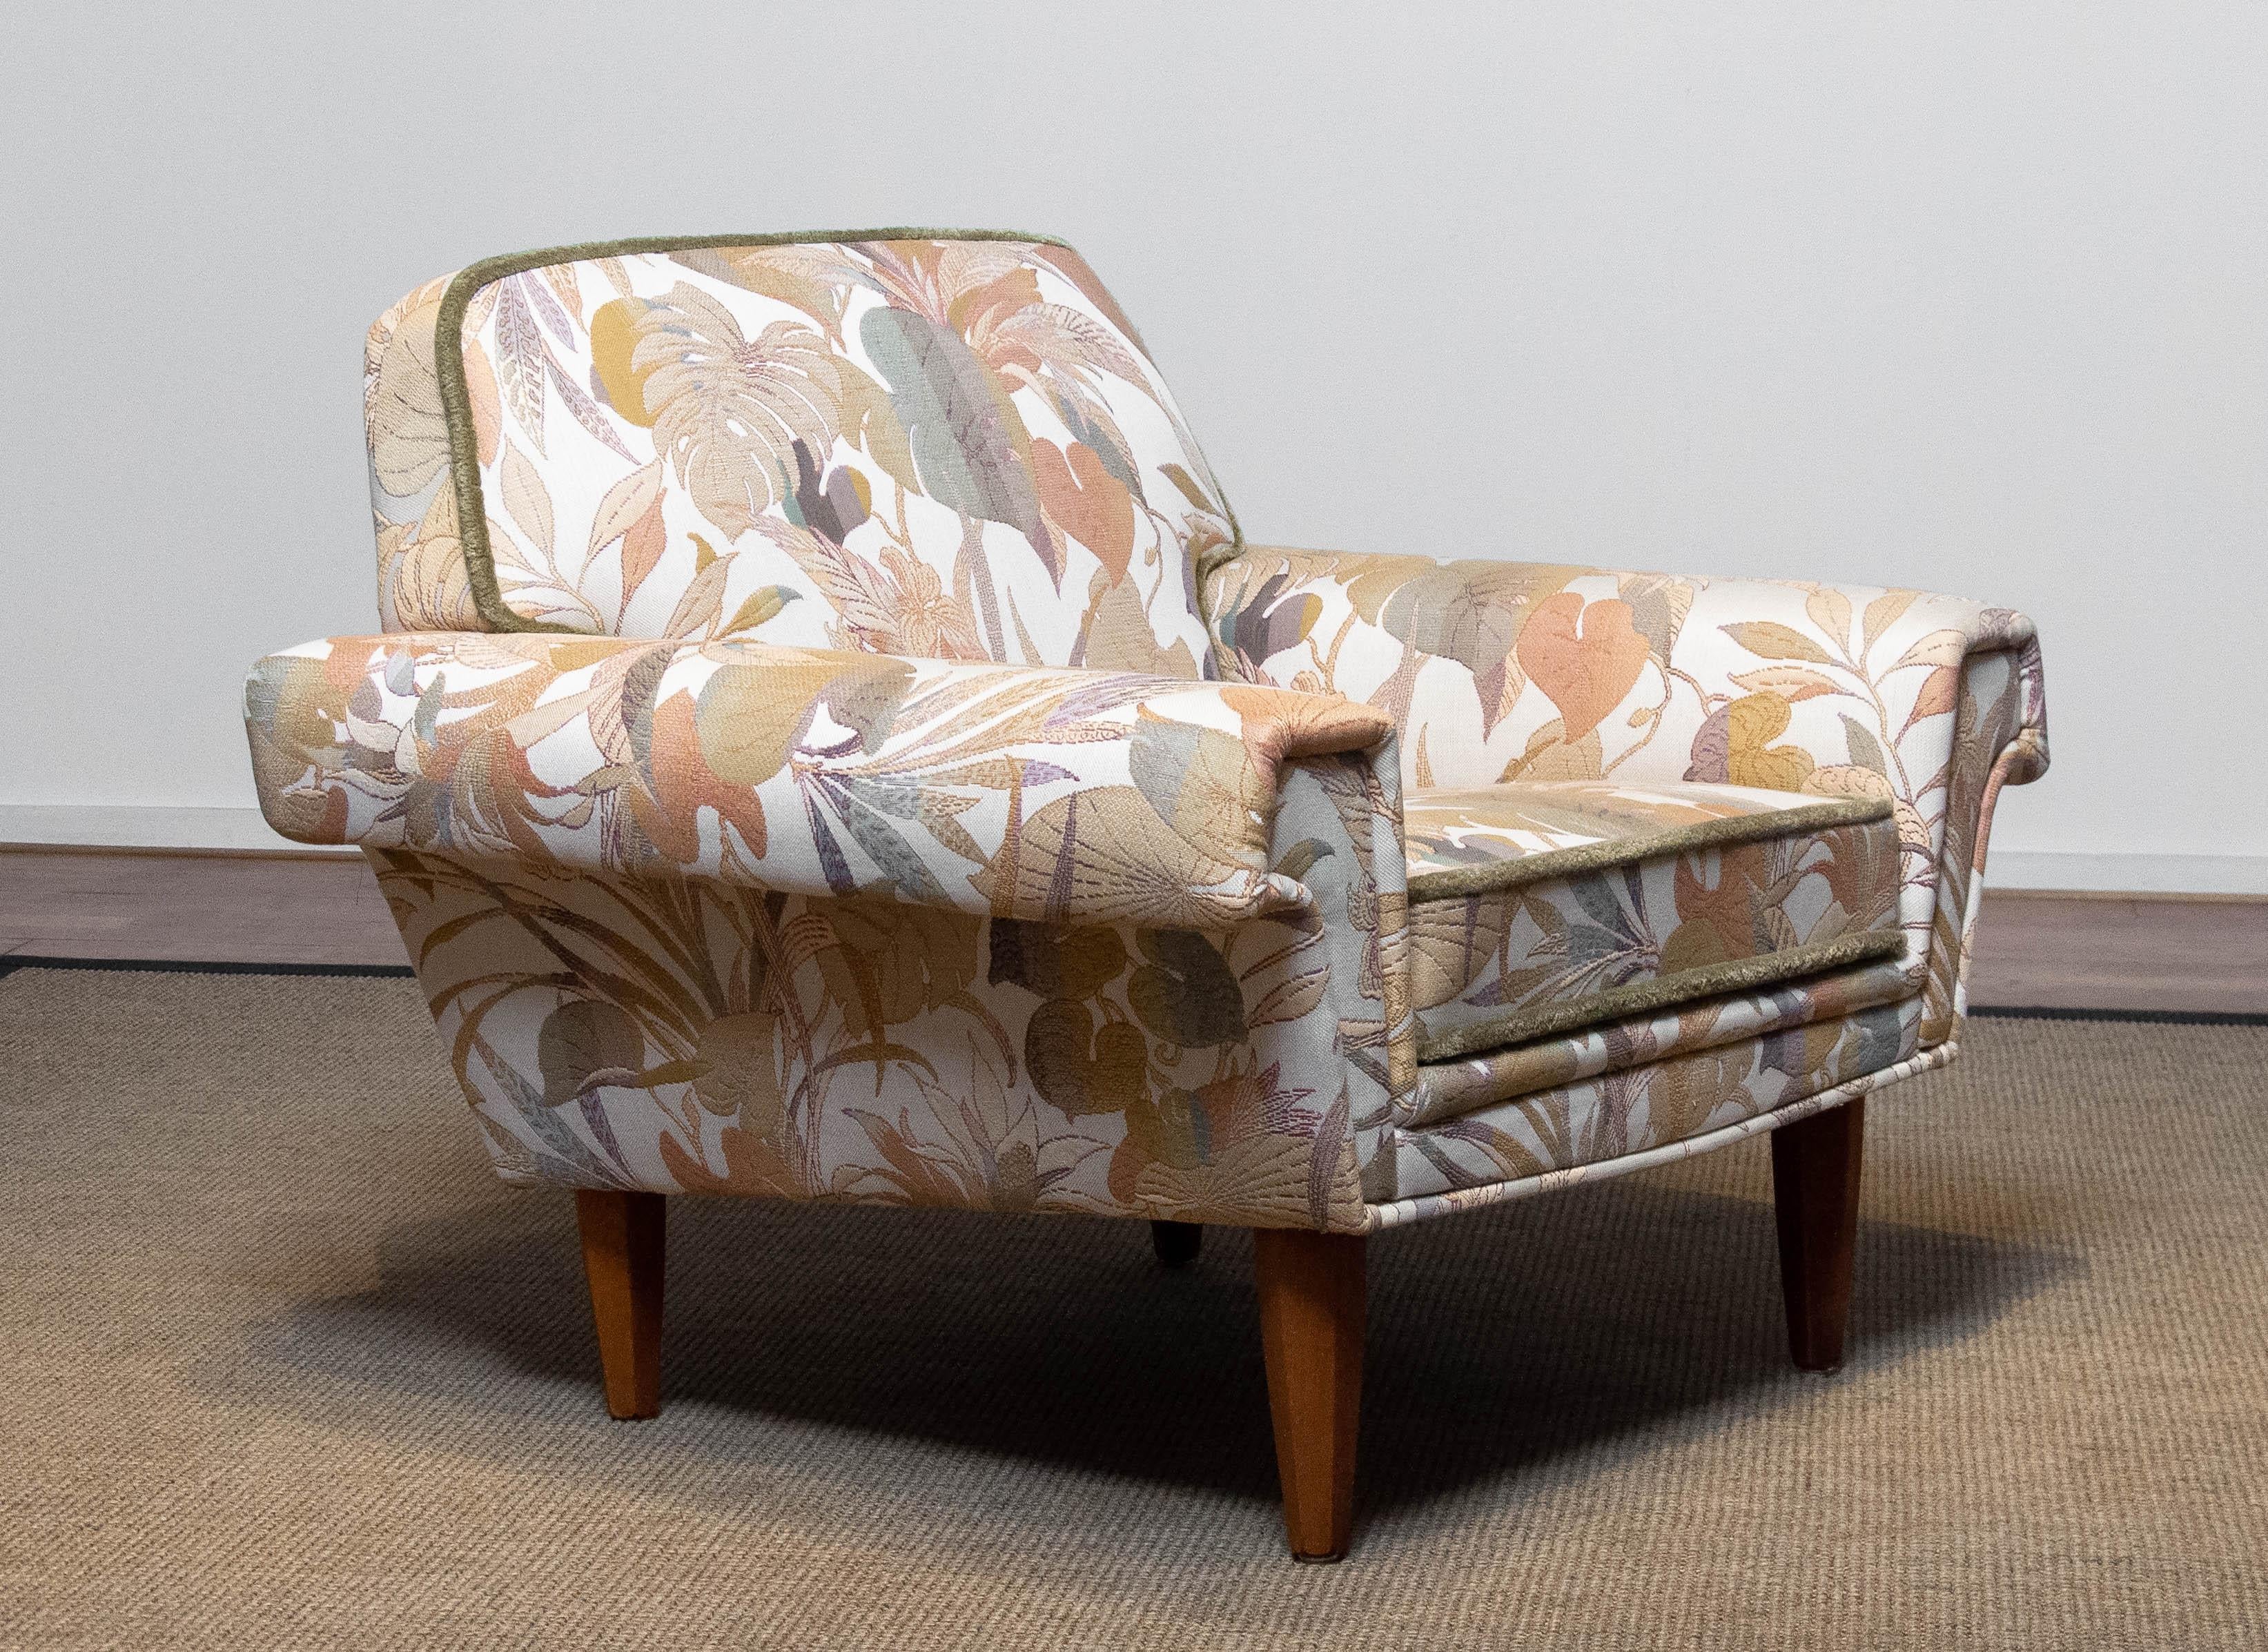 Excellent restored ( in the 1970's ) low back lounge / club chair from Denmark from the 1950's upholstered with beautiful multi colored Jacquard fabric. The chair is in absolutely great and clean condition. Sits and supports very good.
The legs are